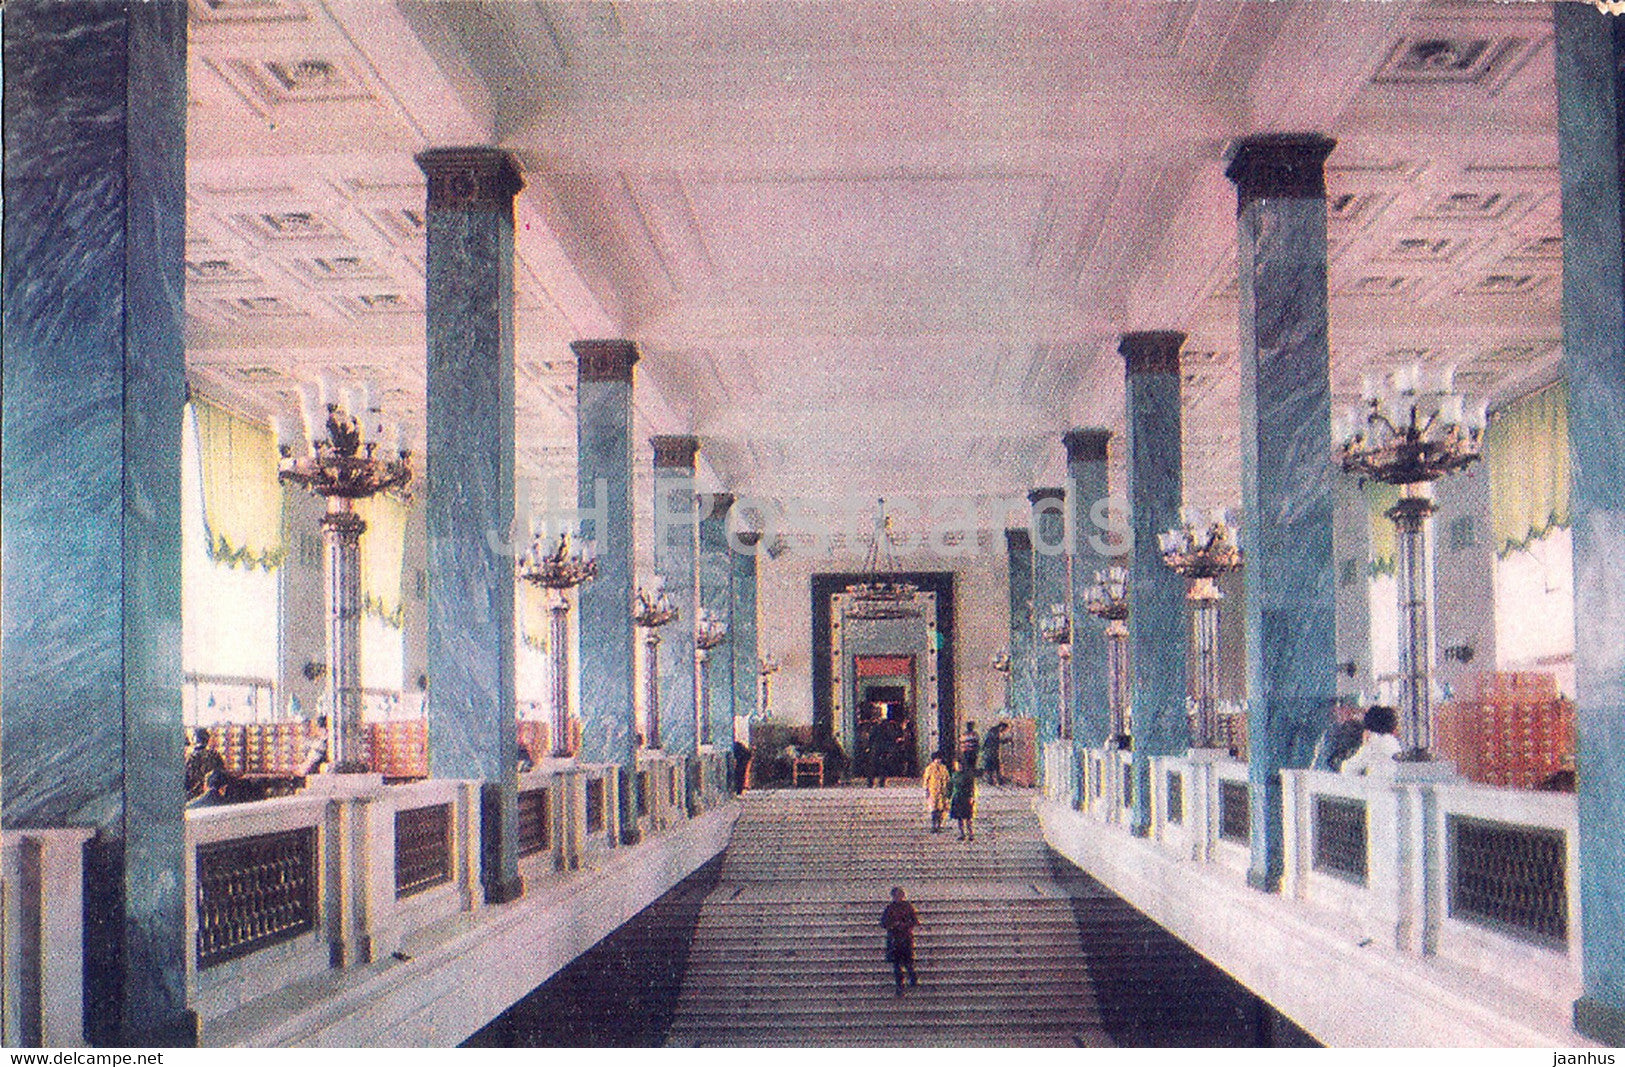 Moscow - Lenin State Library - The Main Staircase - 1974 - Russia USSR - unused - JH Postcards